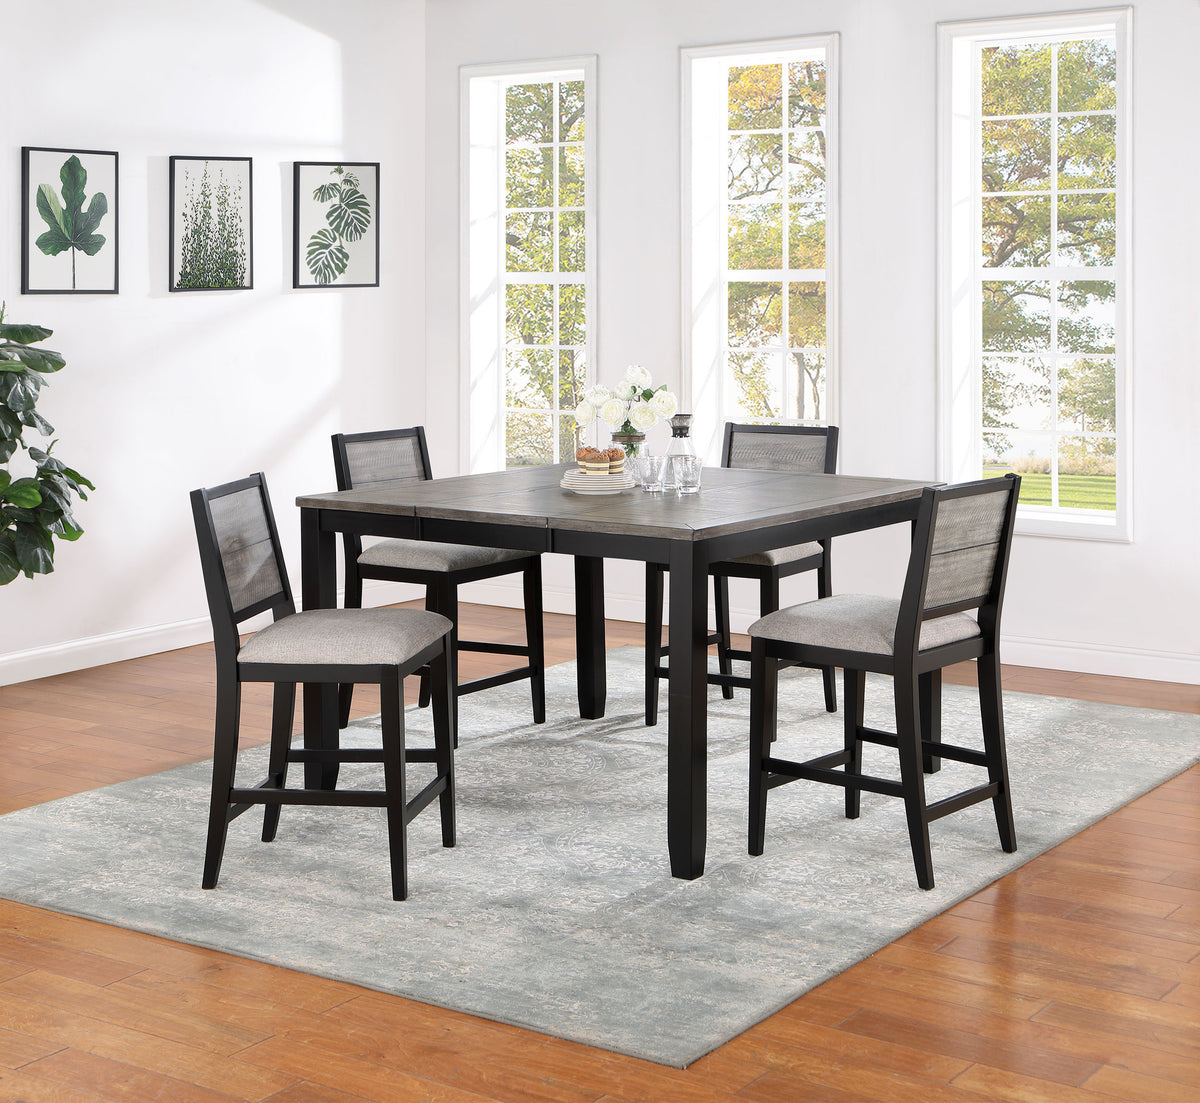 Elodie 5-piece Counter Height Dining Table Set with Extension Leaf Grey and Black Elodie 5-piece Counter Height Dining Table Set with Extension Leaf Grey and Black Half Price Furniture